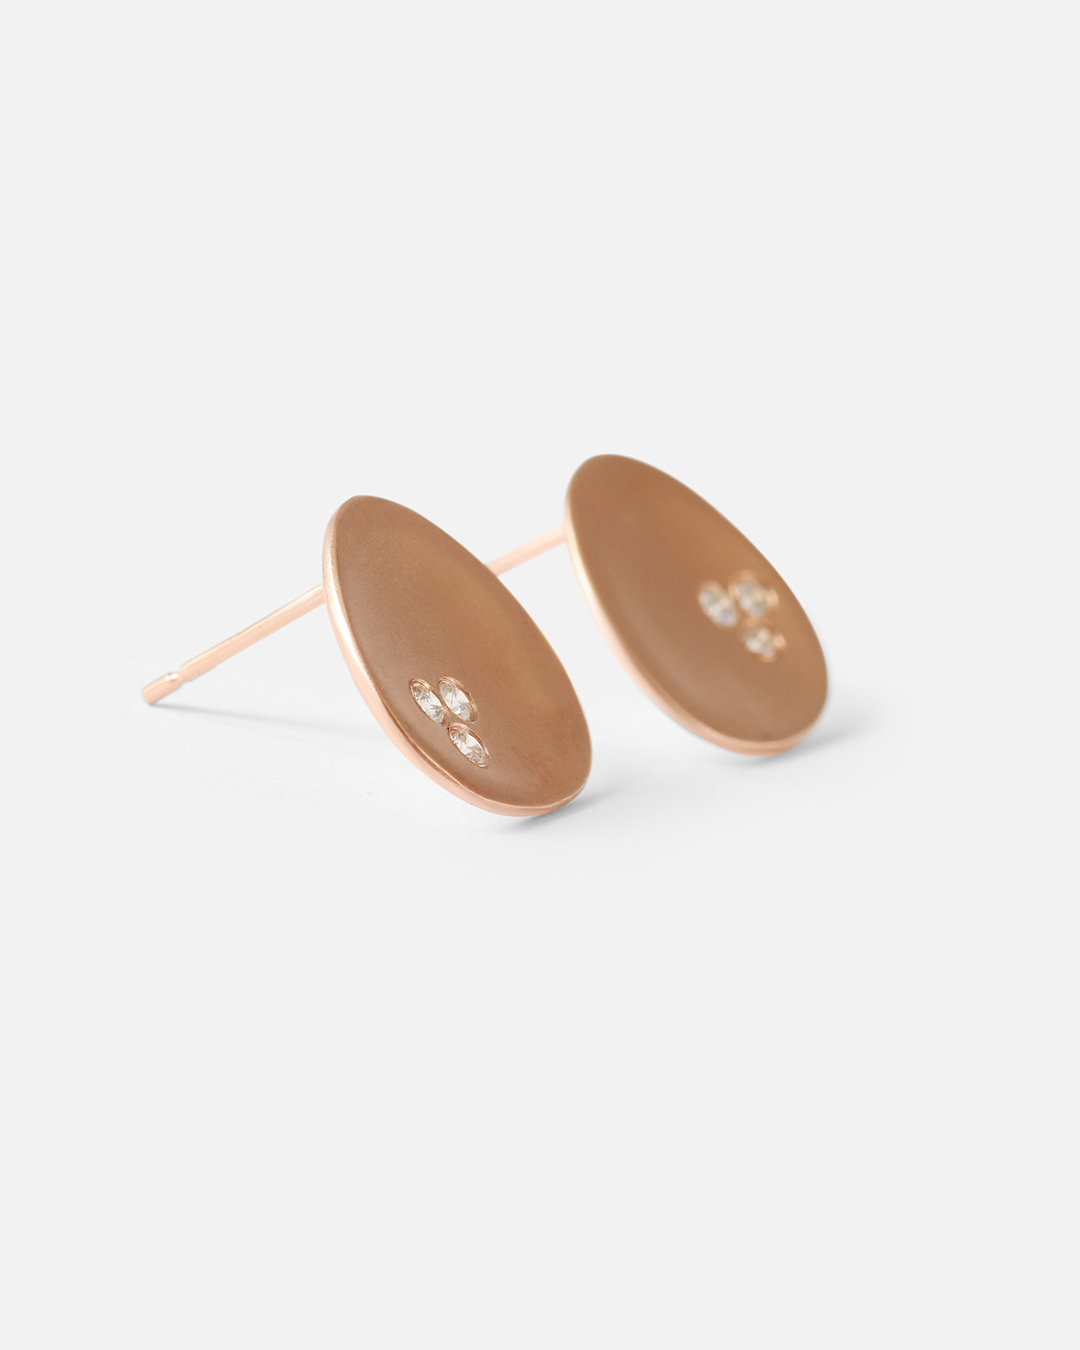 Side view of Leaf / Rose Gold + Diamond Studs By Hiroyo